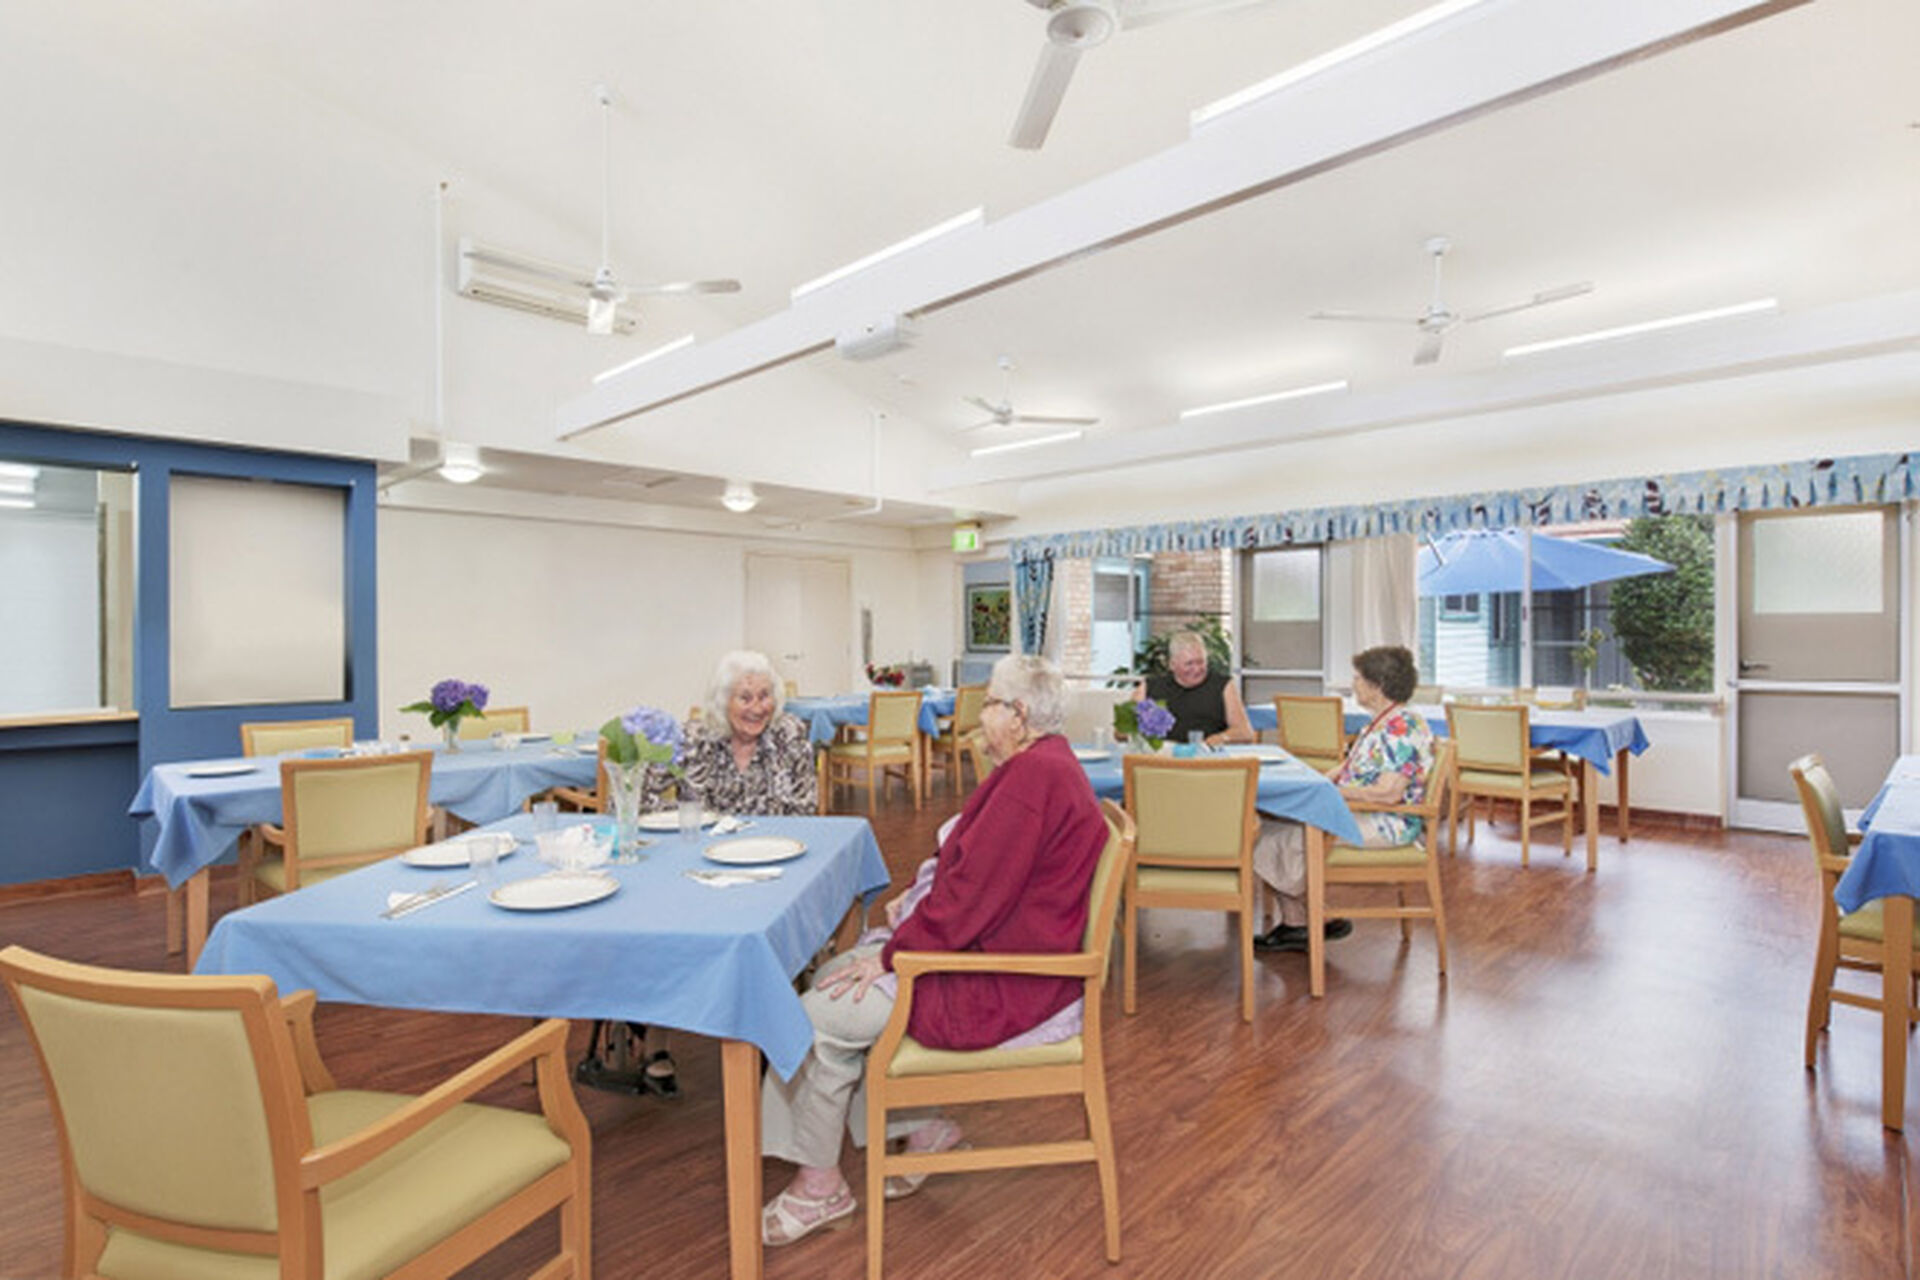 aged care residents sitting and socialising in the spacious dining room at baptistcare maranoa centre aged care home in alstonville nsw far north coast